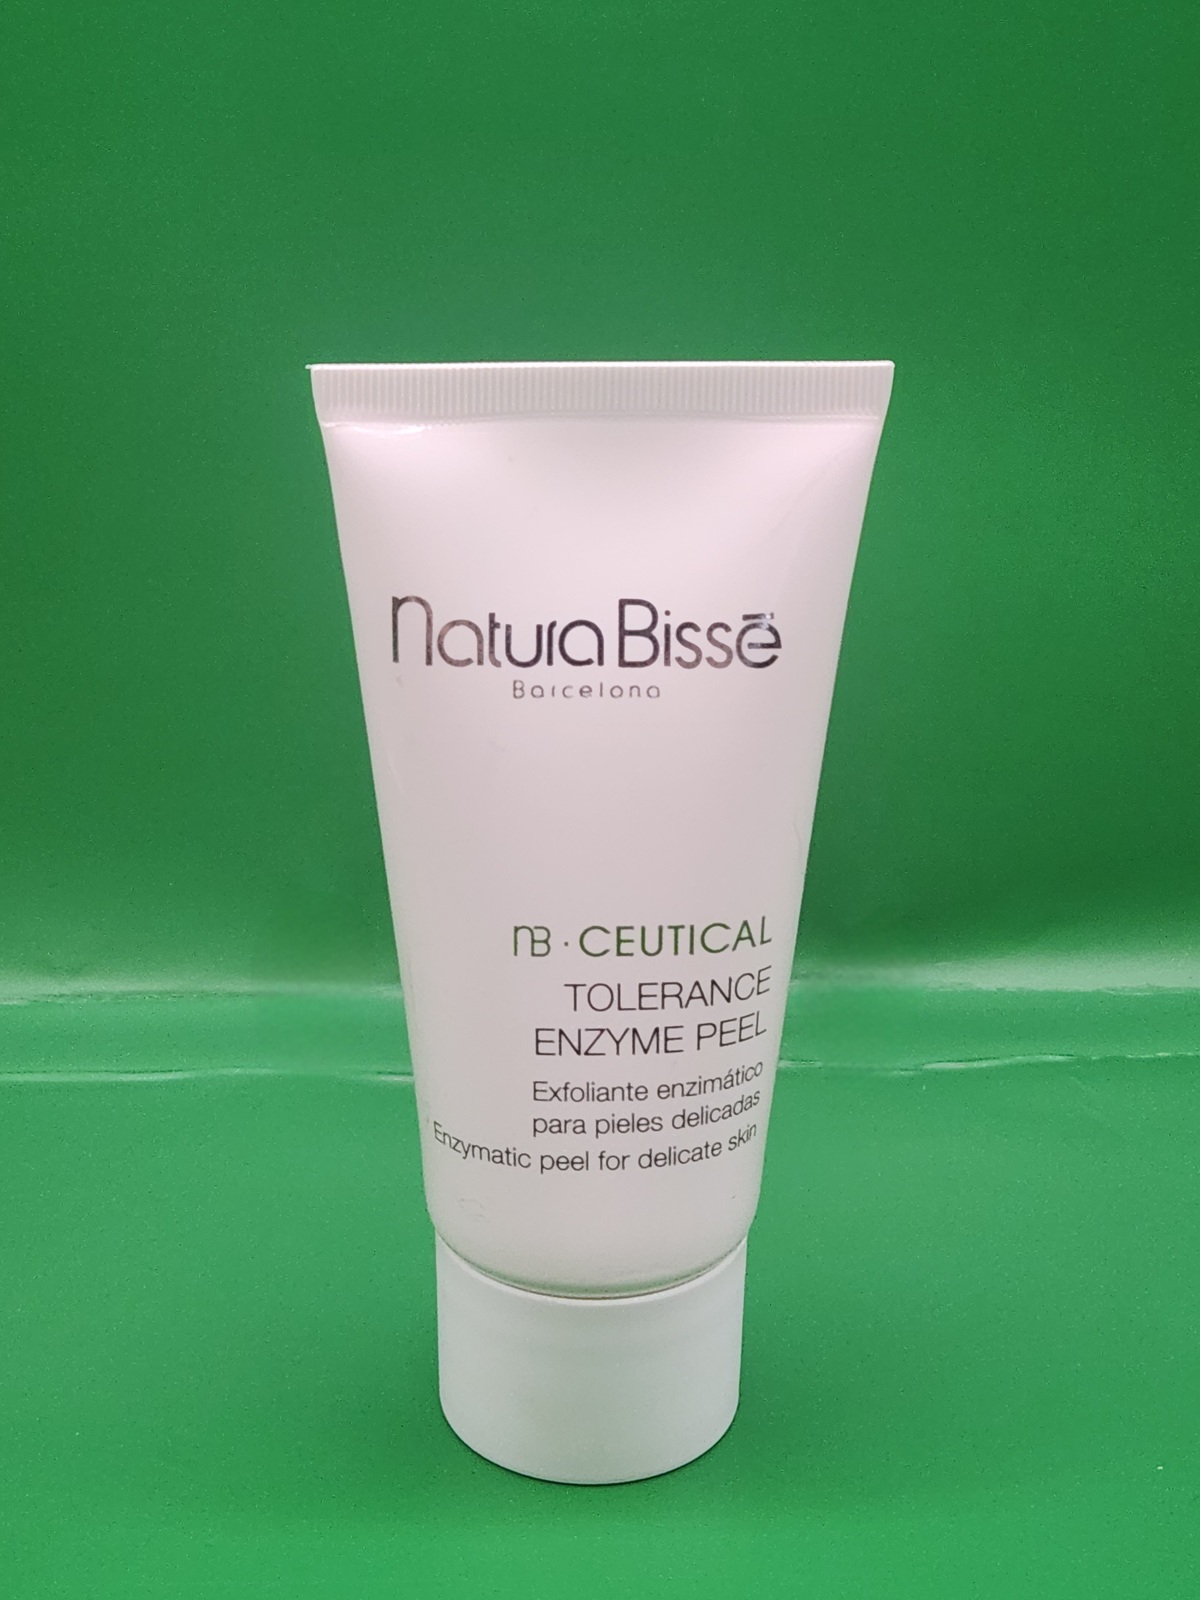 Primary image for Natura Bisse NB Ceutical Tolerance Enzyme Peel, 50ml (Sealed)